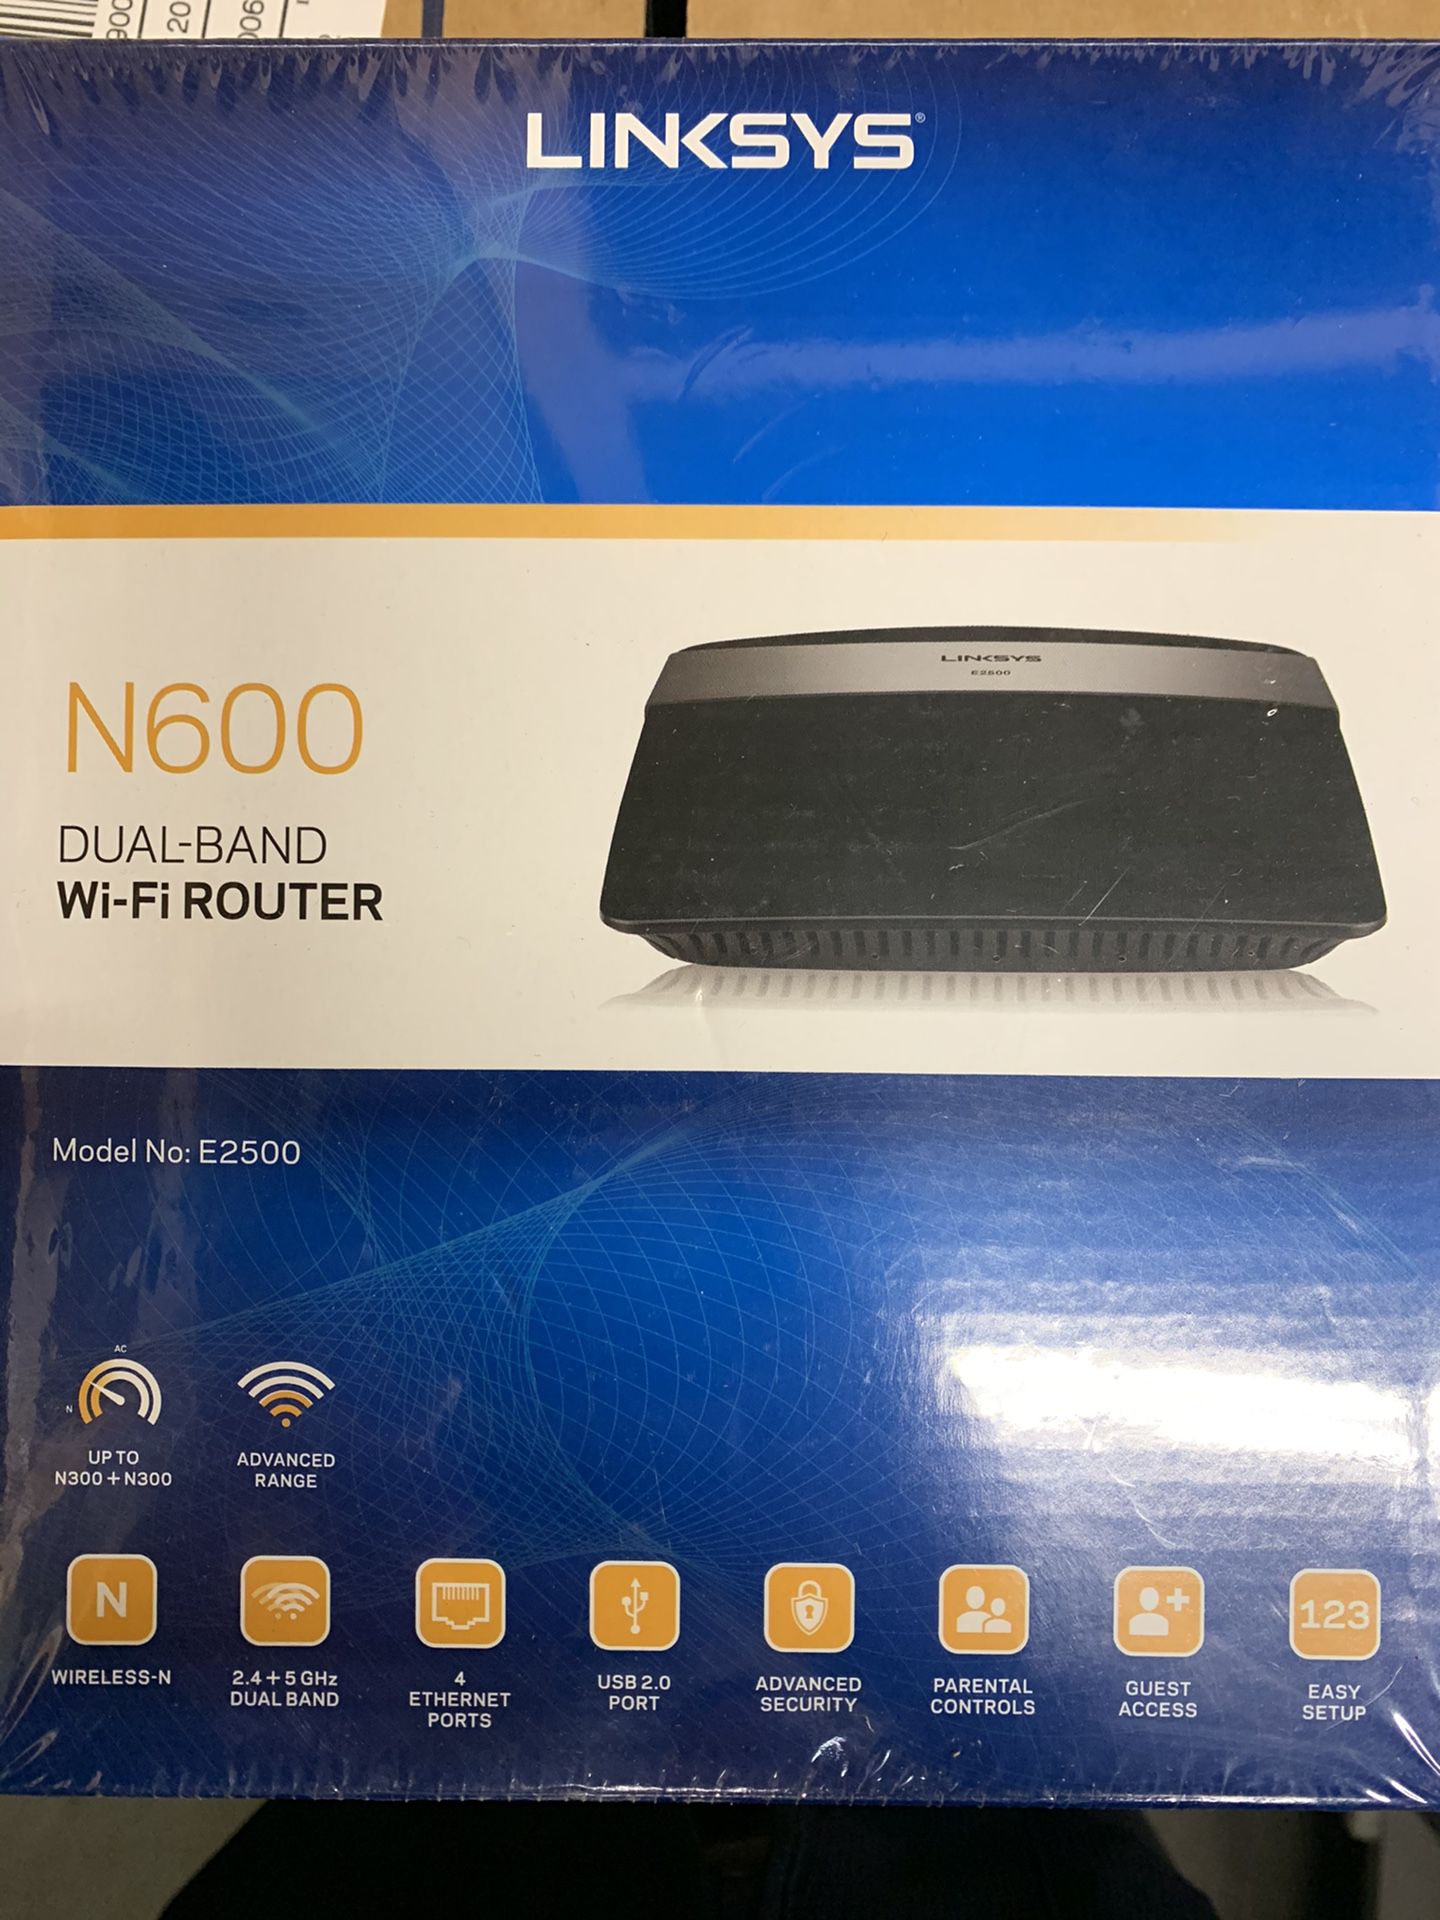 Linksys Dual-Band Wi-Fi Router